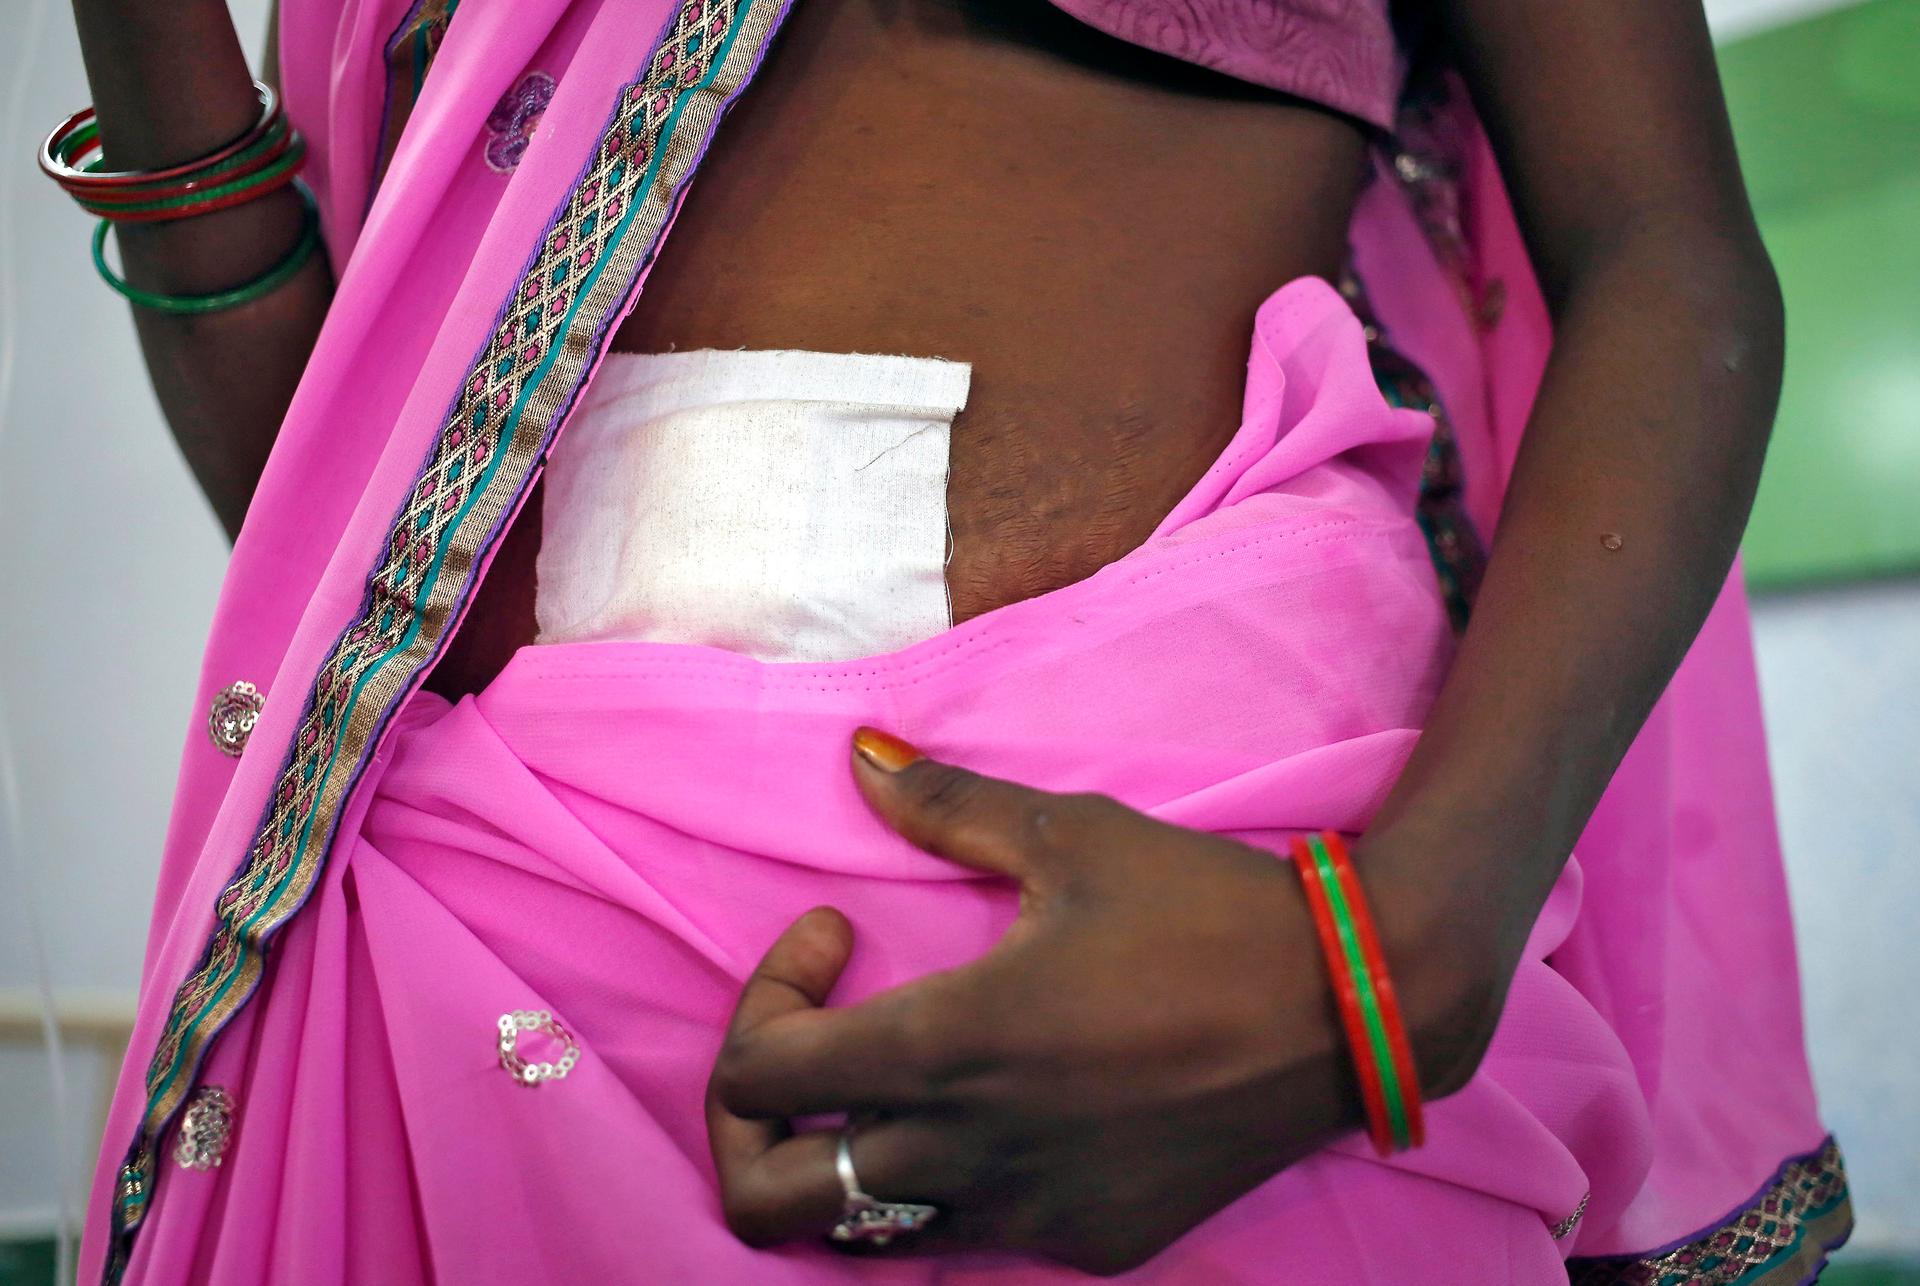 A Indian woman, who underwent sterilization surgery at a makeshift government facility in the Indian state of Chhattisgarh where at least 13 women died. 